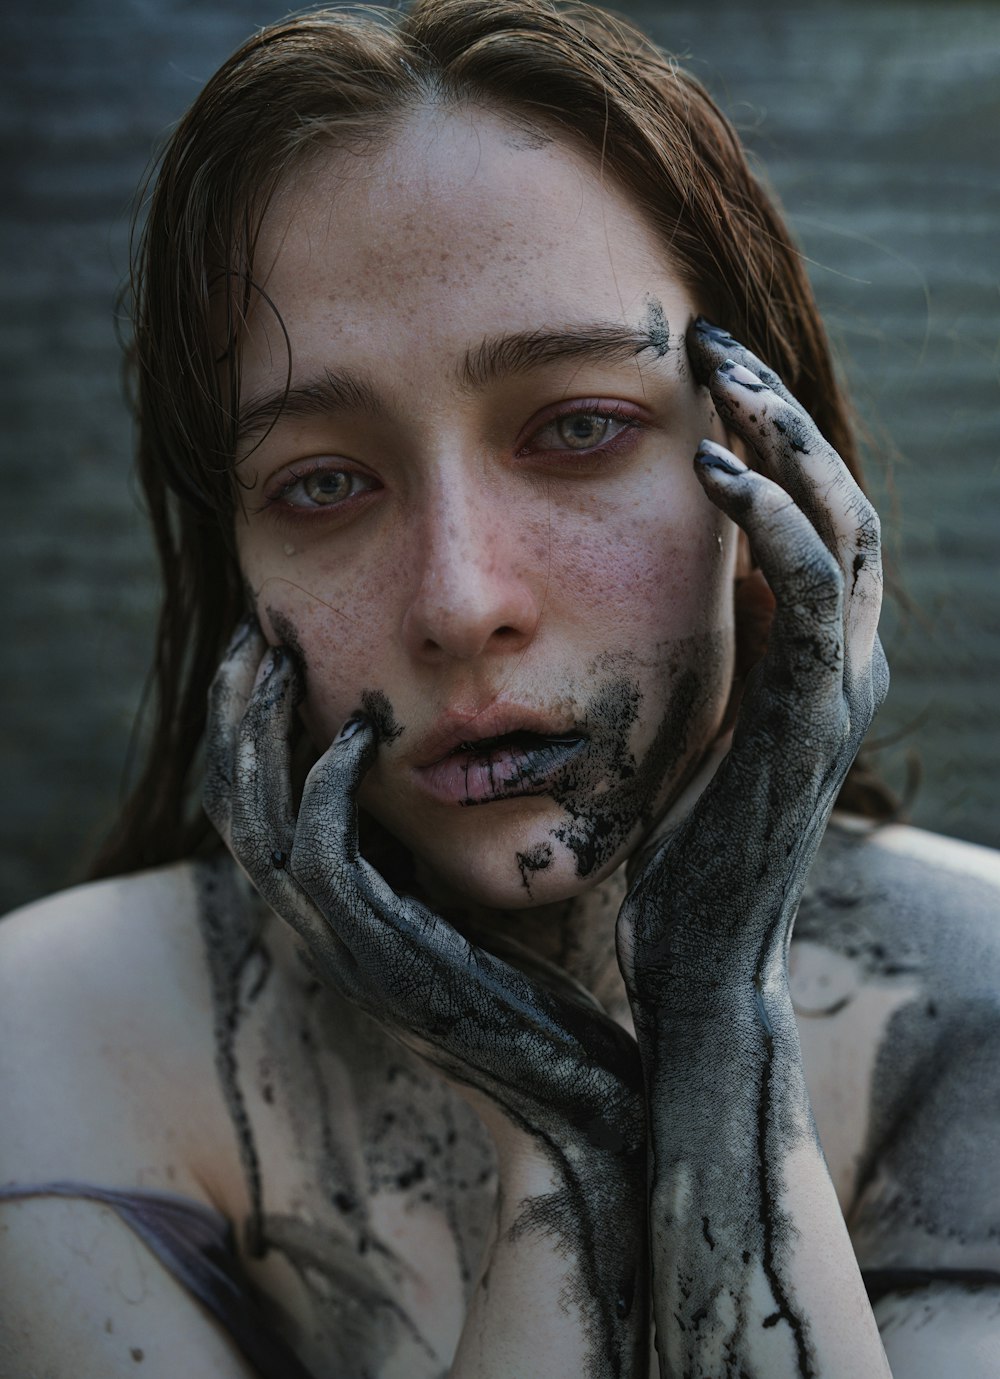 a woman with mud on her face and hands